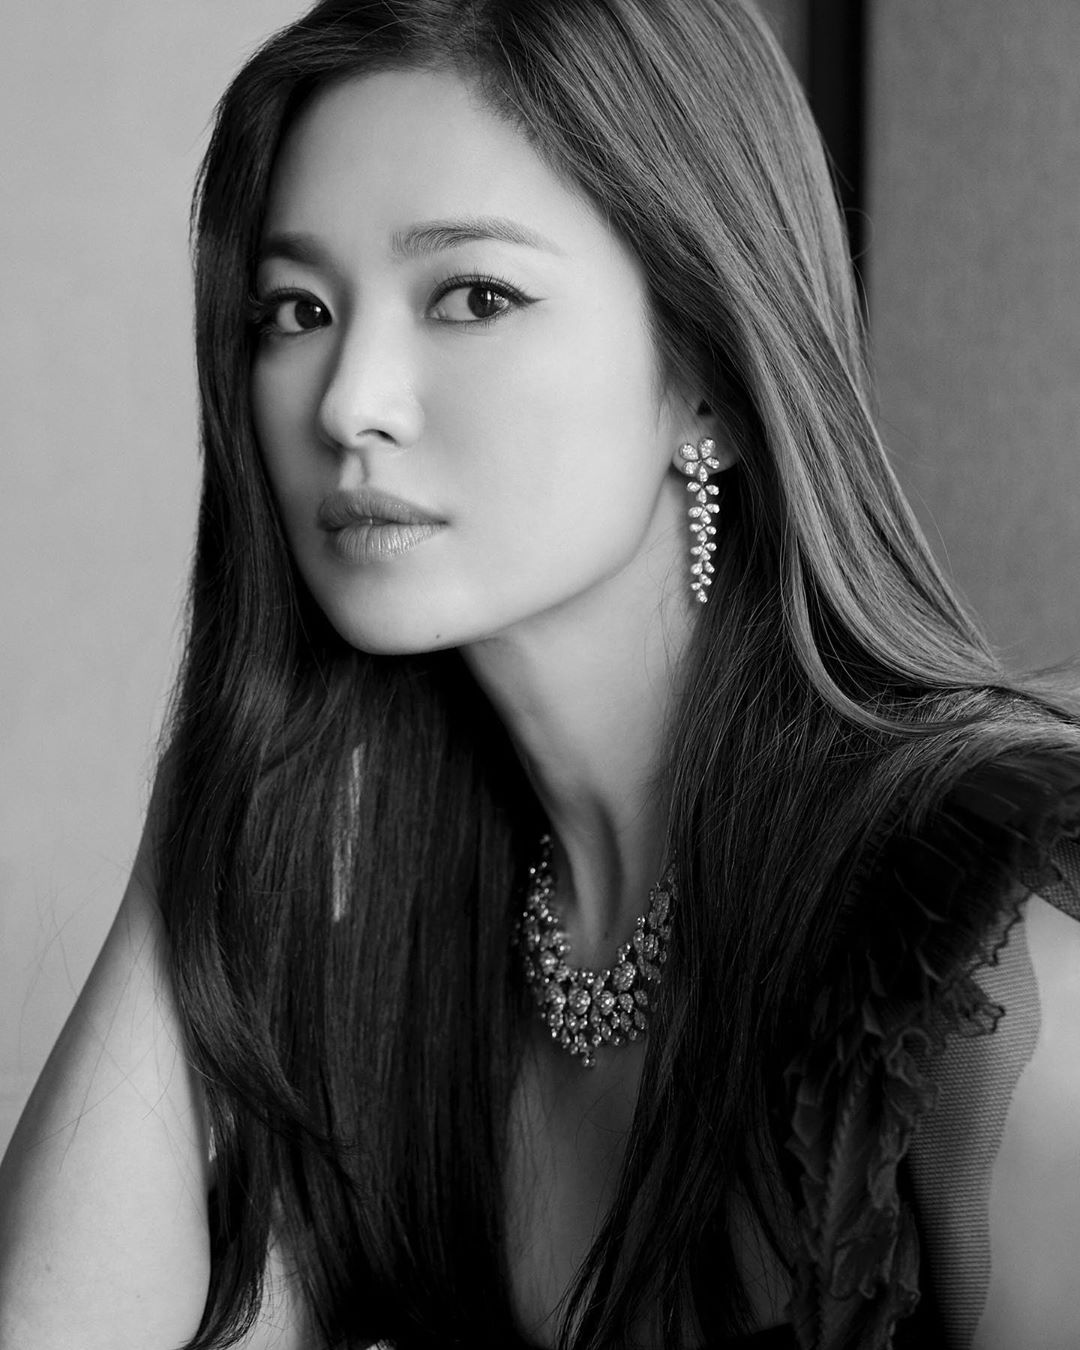 Actor Song Hye-kyo has reported on his recent situation.On the 25th, Song Hye-kyo posted two photos on his instagram , hair, makeup staff and ID of jewelry brand that he is working as a model.In the black and white photo, Song Hye-kyo is looking at the camera with his long hair hanging down, and Song Hye-kyo is wearing a colorful necklace and earrings, and wearing a dress with lace decoration on sleeveless.The photo followed was taken closer to the face, which is a behind-the-scenes cut of a jewelery brand event that Song Hye-kyo attended on the 17th.Song Hye-kyo appeared in the TVN drama Boyfriend which ended on January 24th.Photo = Song Hye-kyo Instagram  